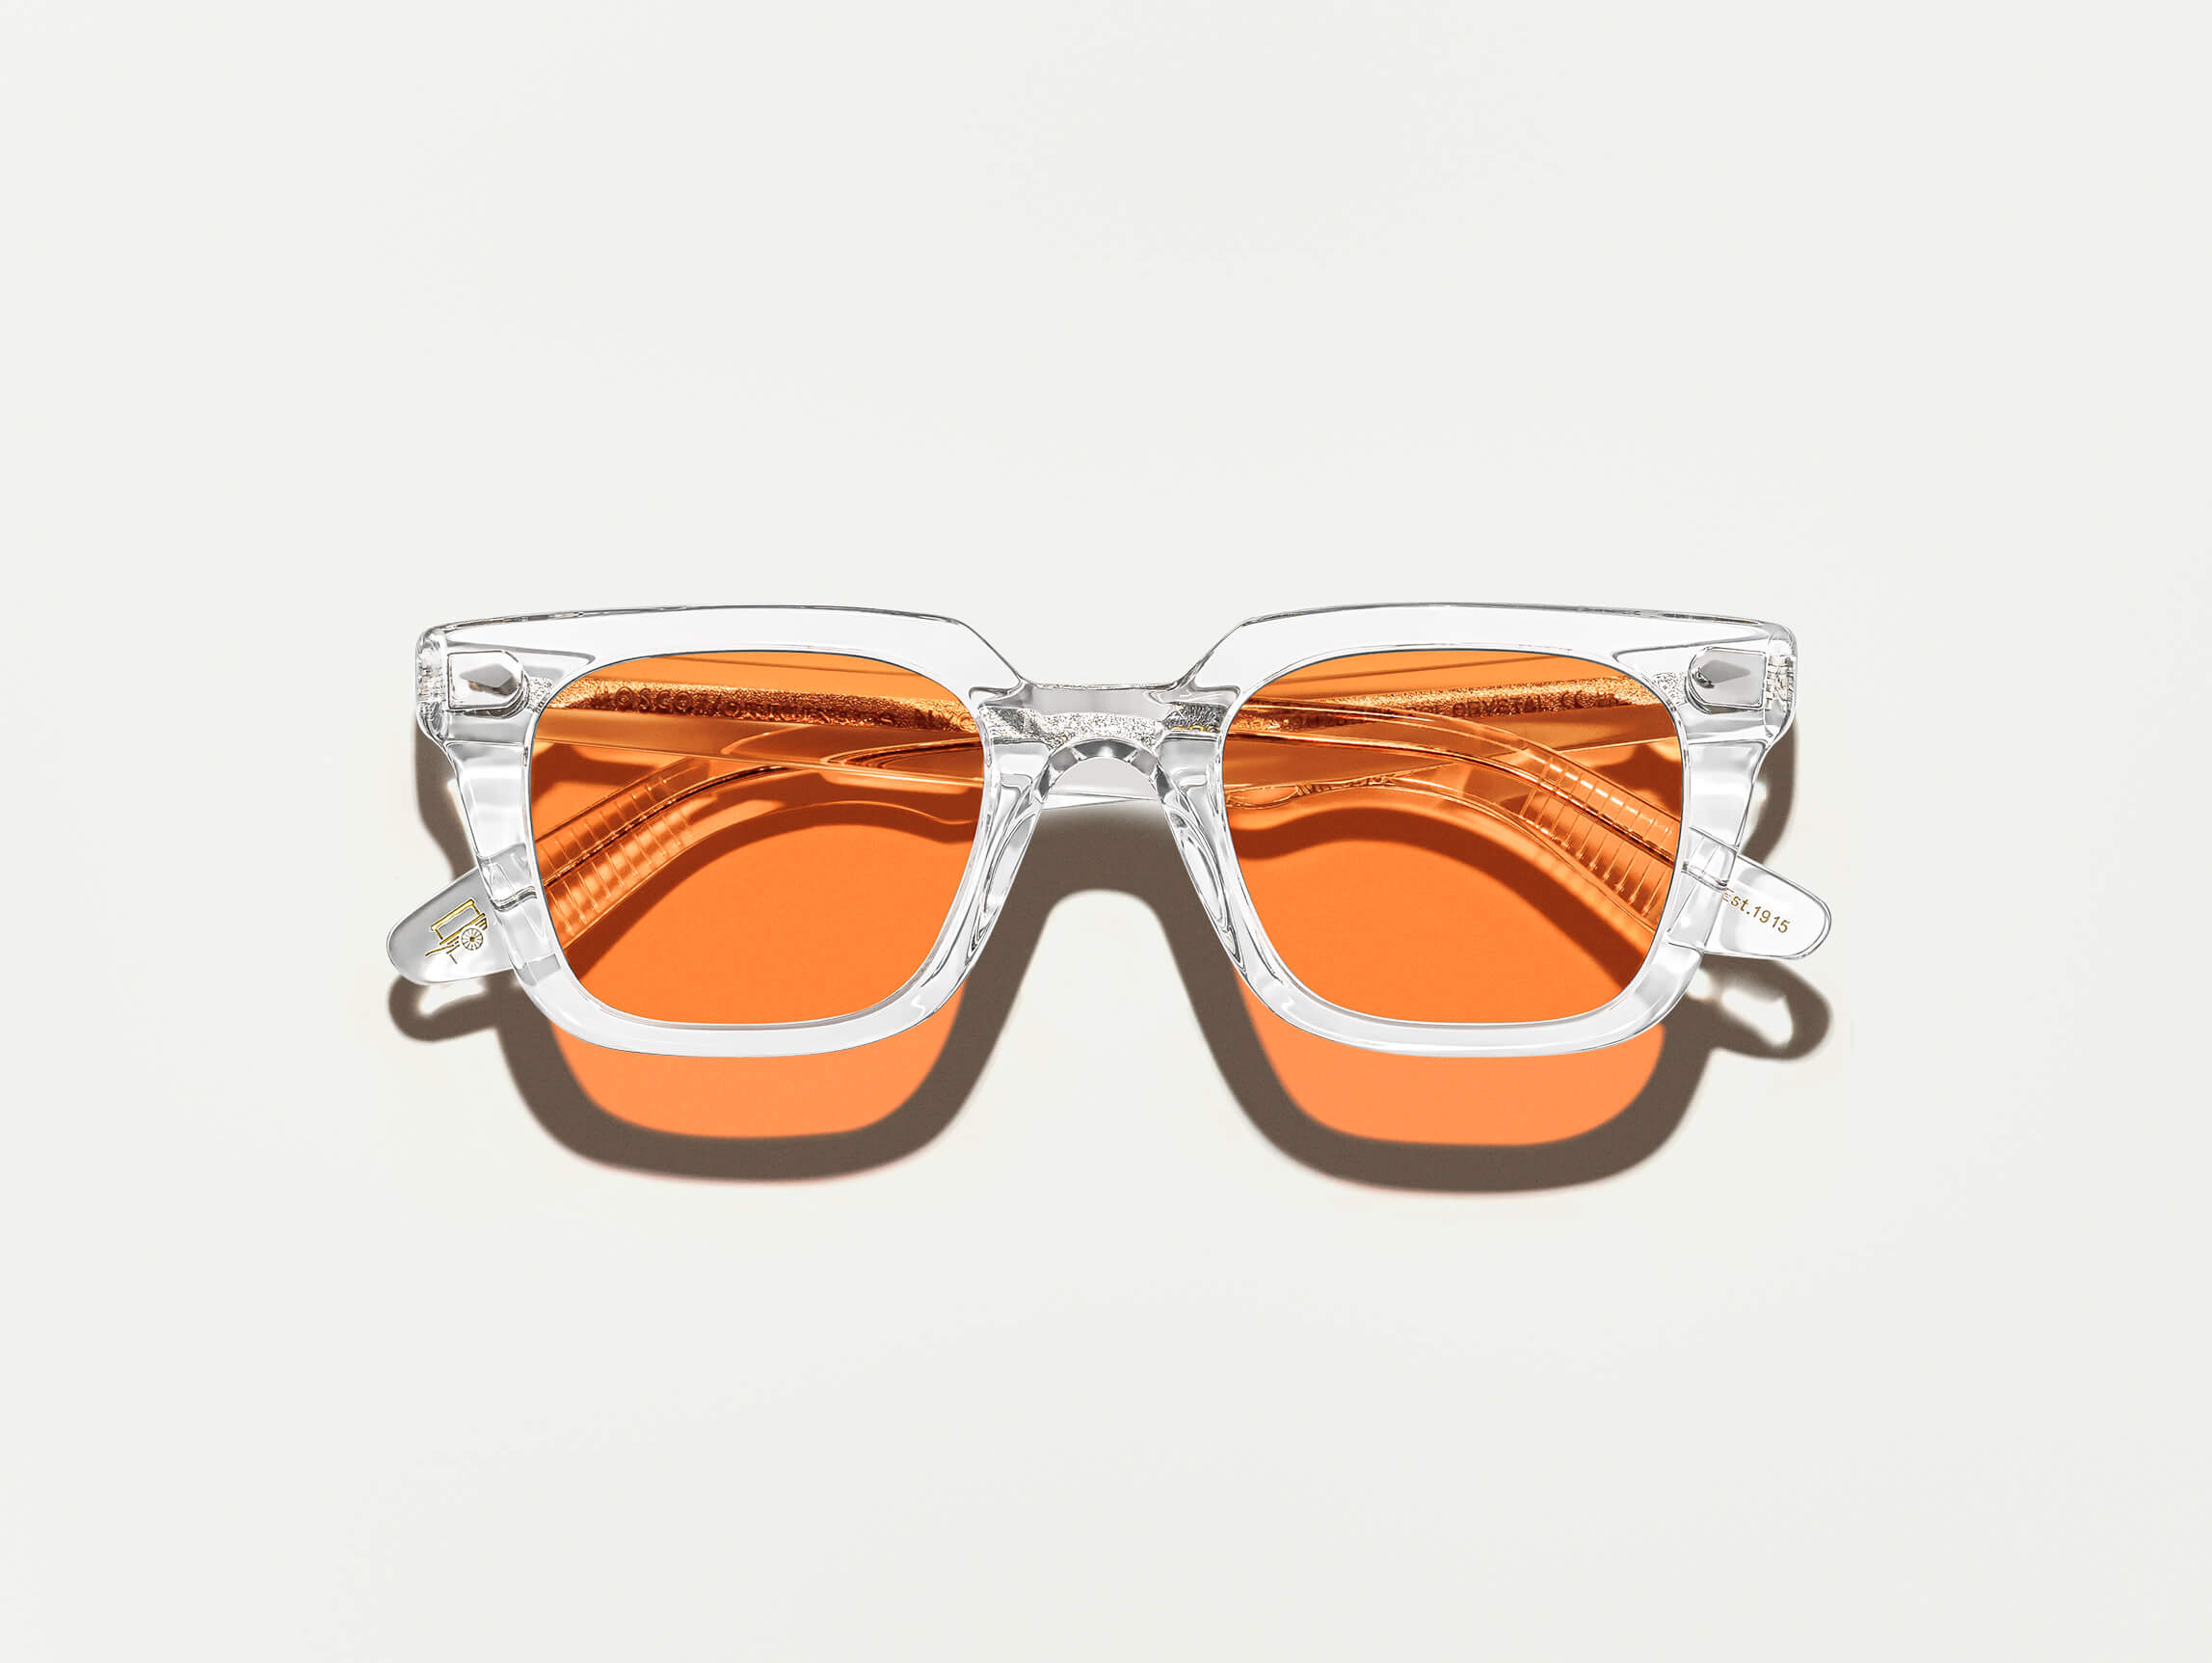 The GROBER Crystal with Woodstock Orange Tinted Lenses